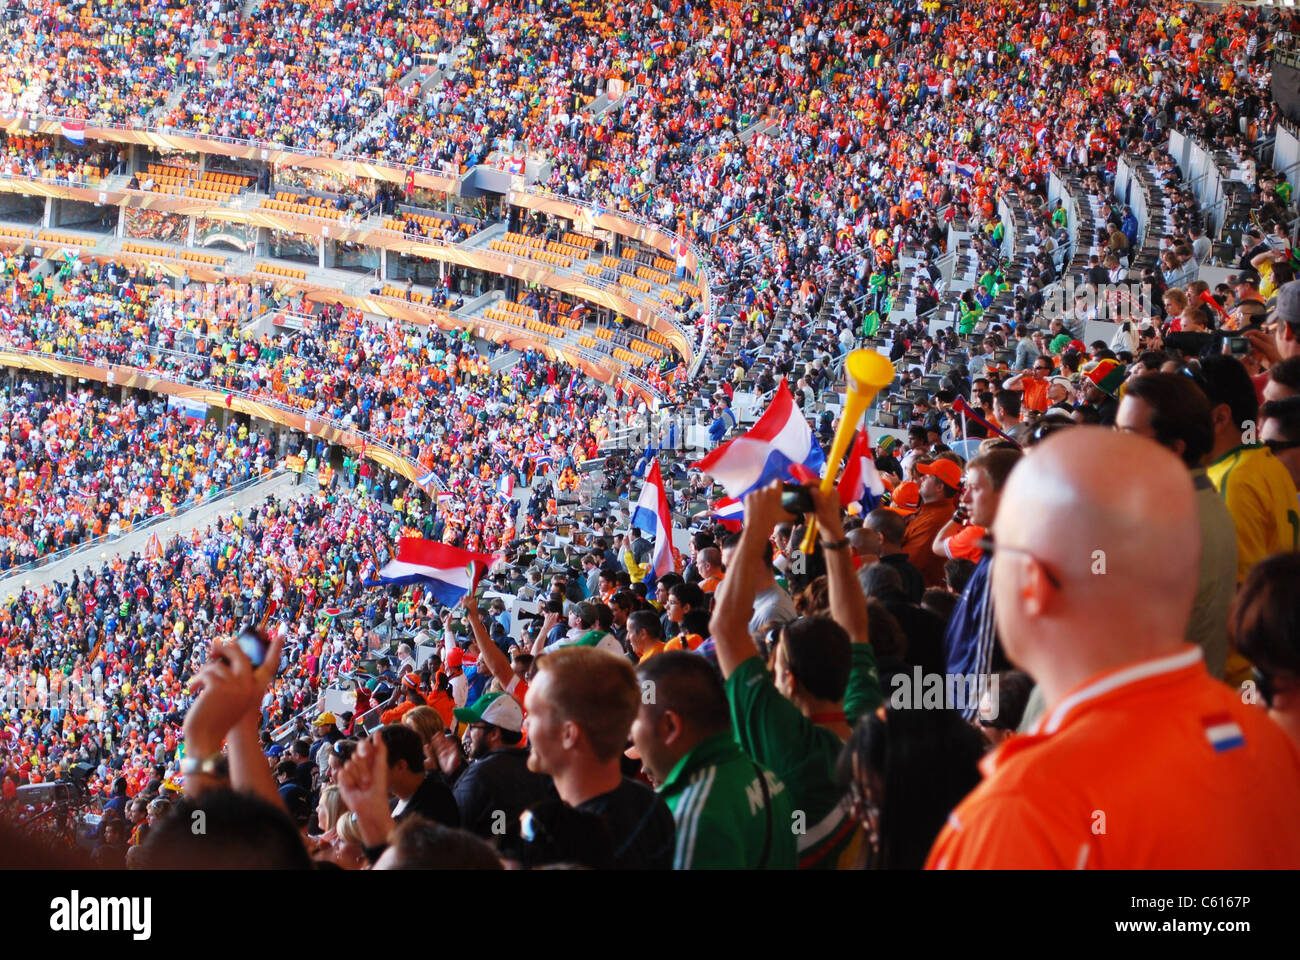 Fans cheer during the Netherlands vs. Denmark World Cup soccer match